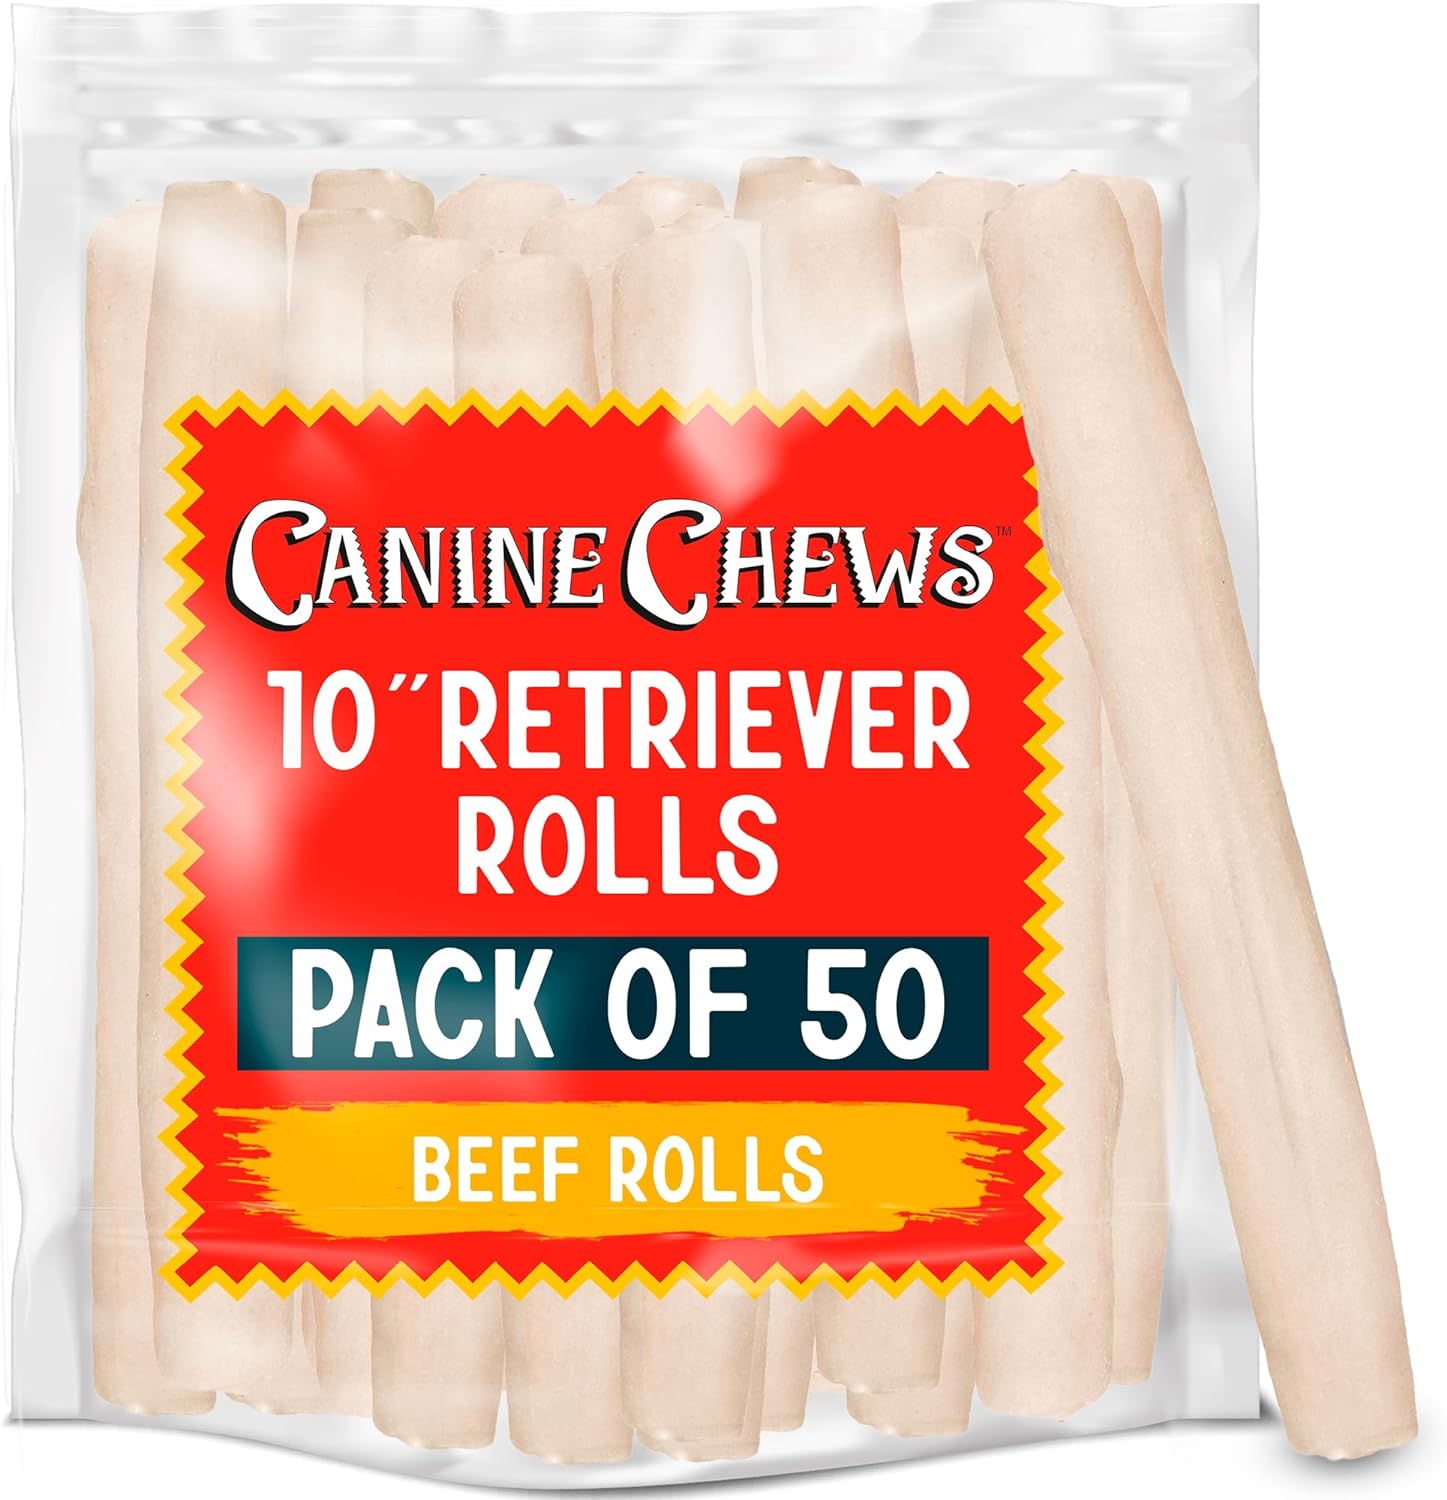 Canine Chews 10" Dog Rawhide Retriever Rolls - Rawhide Bones for Large Dogs (50 pk) - Natural Beef Dog Rawhide Chews - Single Ingredient Dog Rawhide Bones - Large Rawhide Bones for Dogs Dental Chew